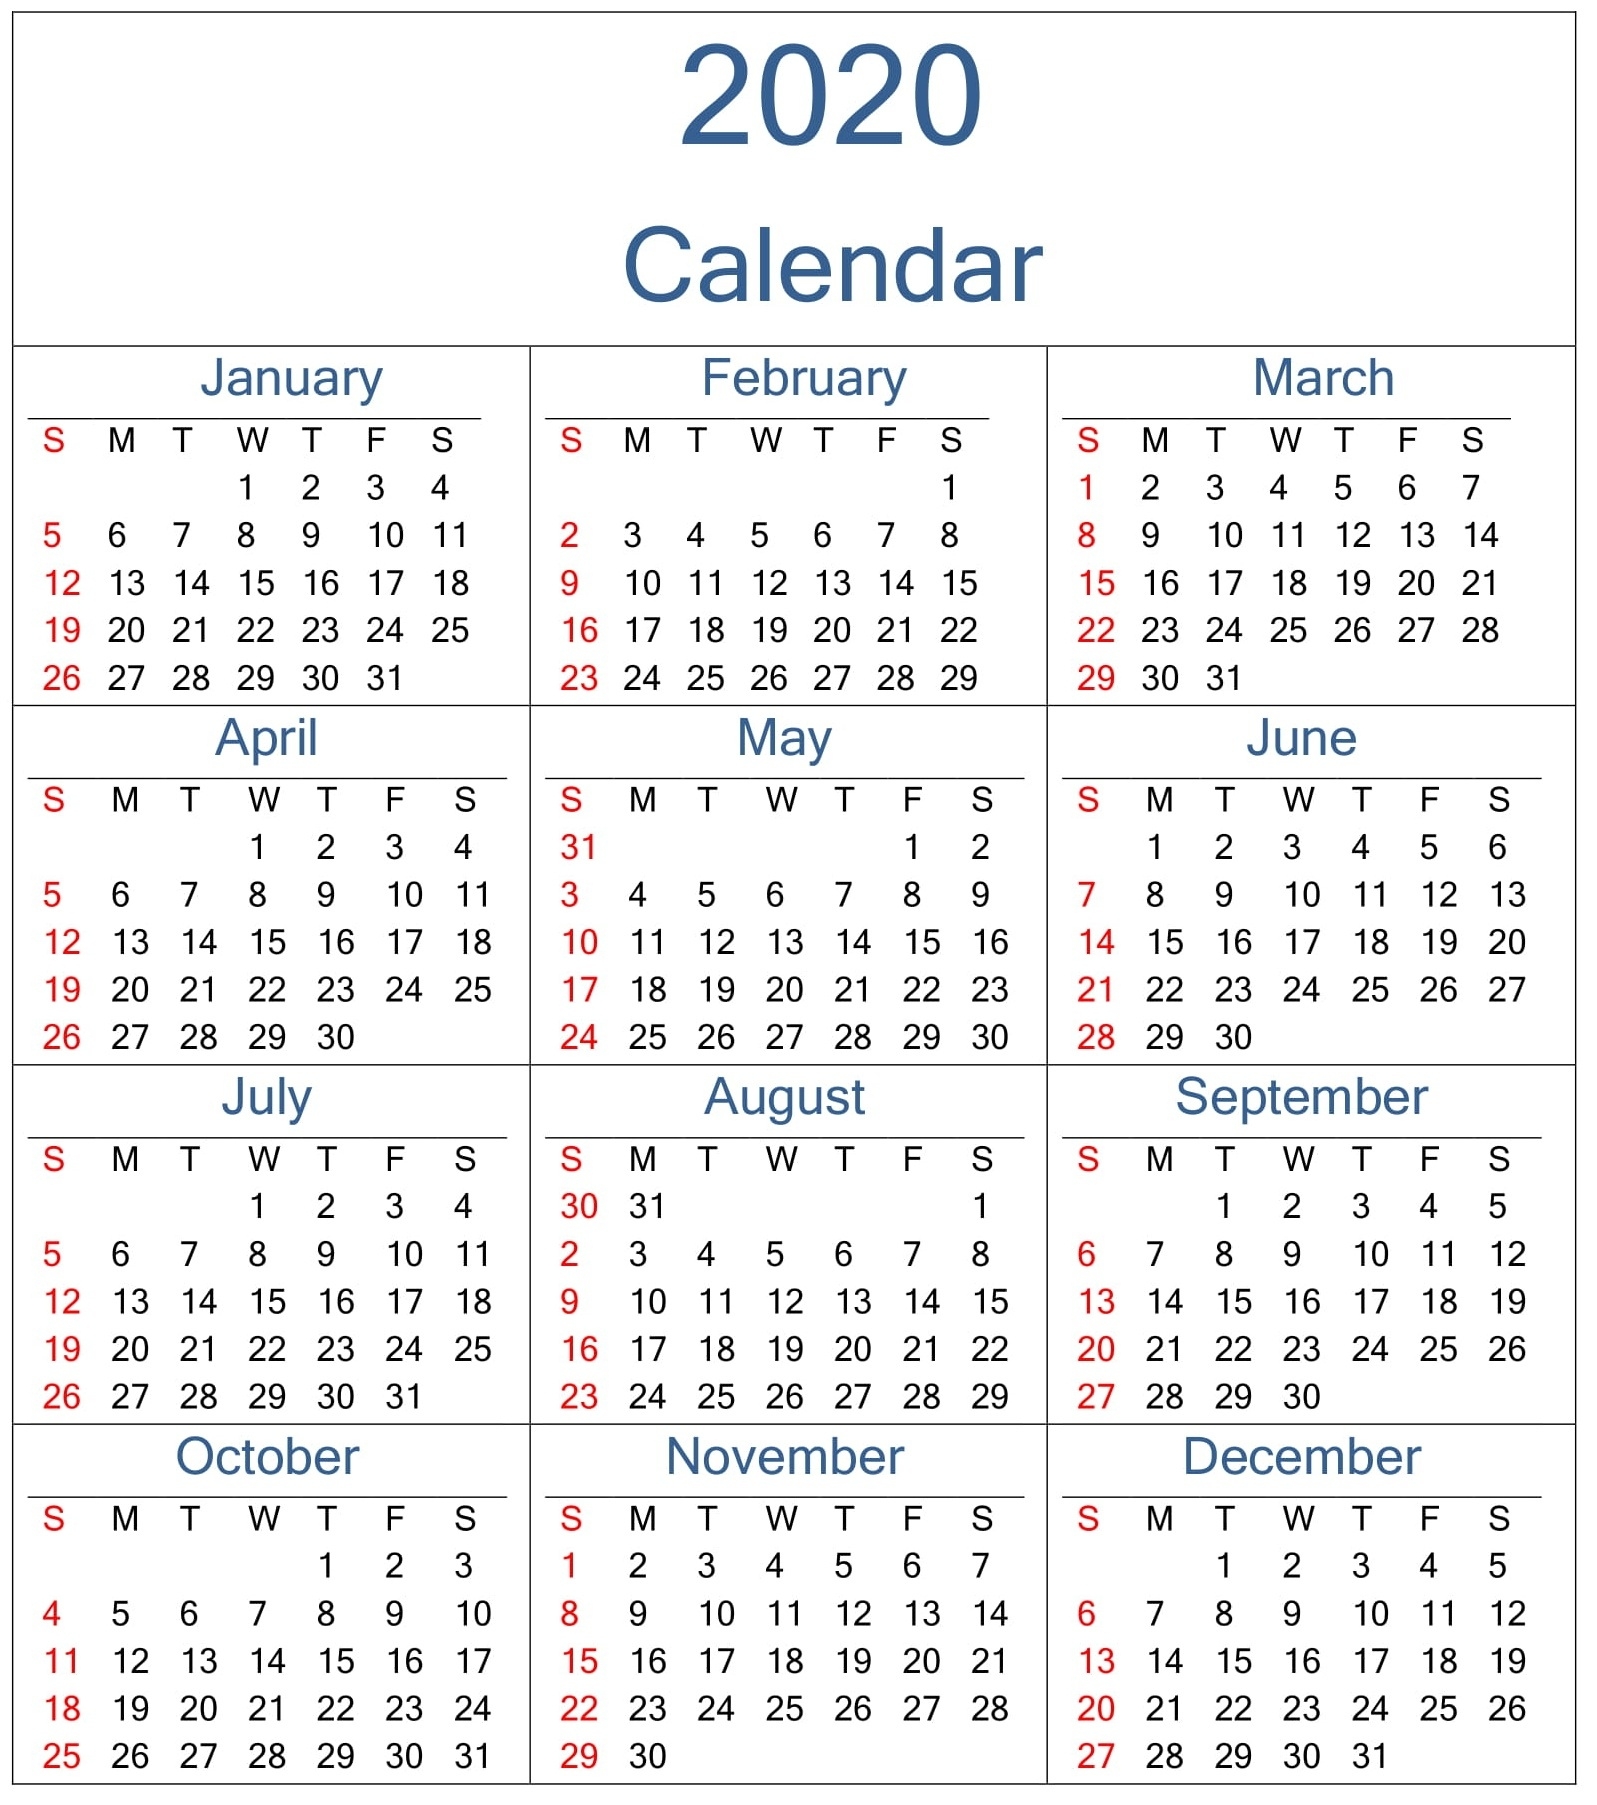 Yearly 2020 Calendar Excel Template - Latest Printable 2020 Calendar Template That Has Days Numbered